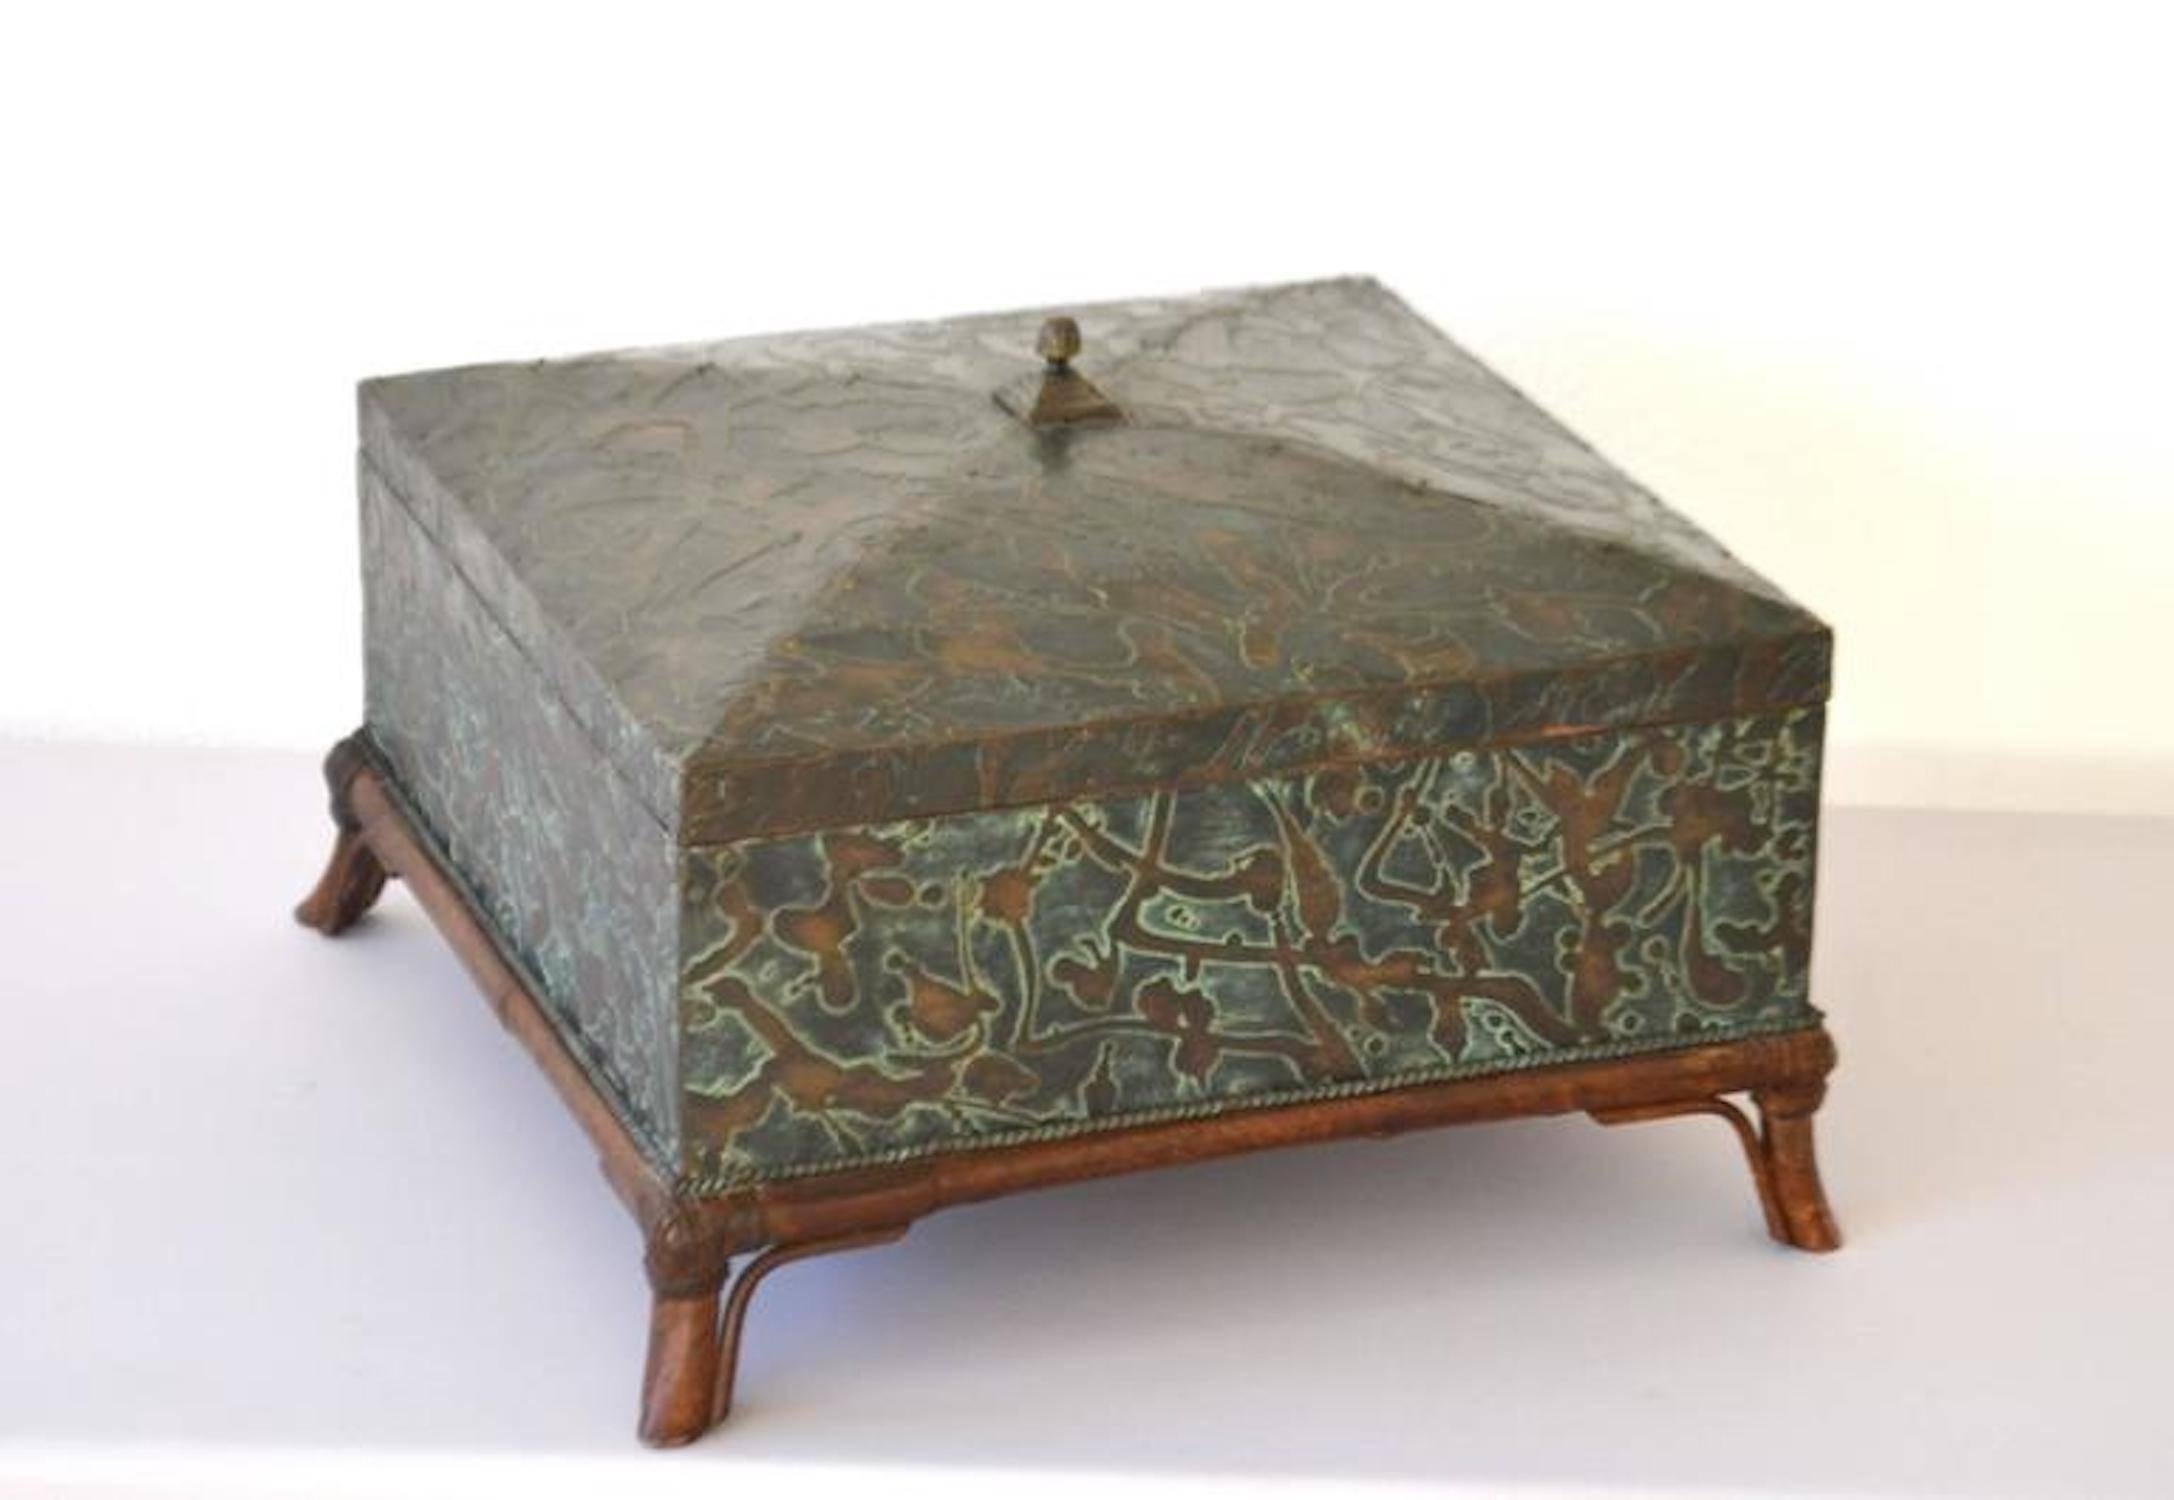 Stunning Postmodern handmade etched brass box by Maitland-Smith, circa 1970s-1980s. This custom artisan crafted glamorous decorative box is designed with a hinged lid, upholstered velvet interior and mounted on a rattan base with leather wrapped